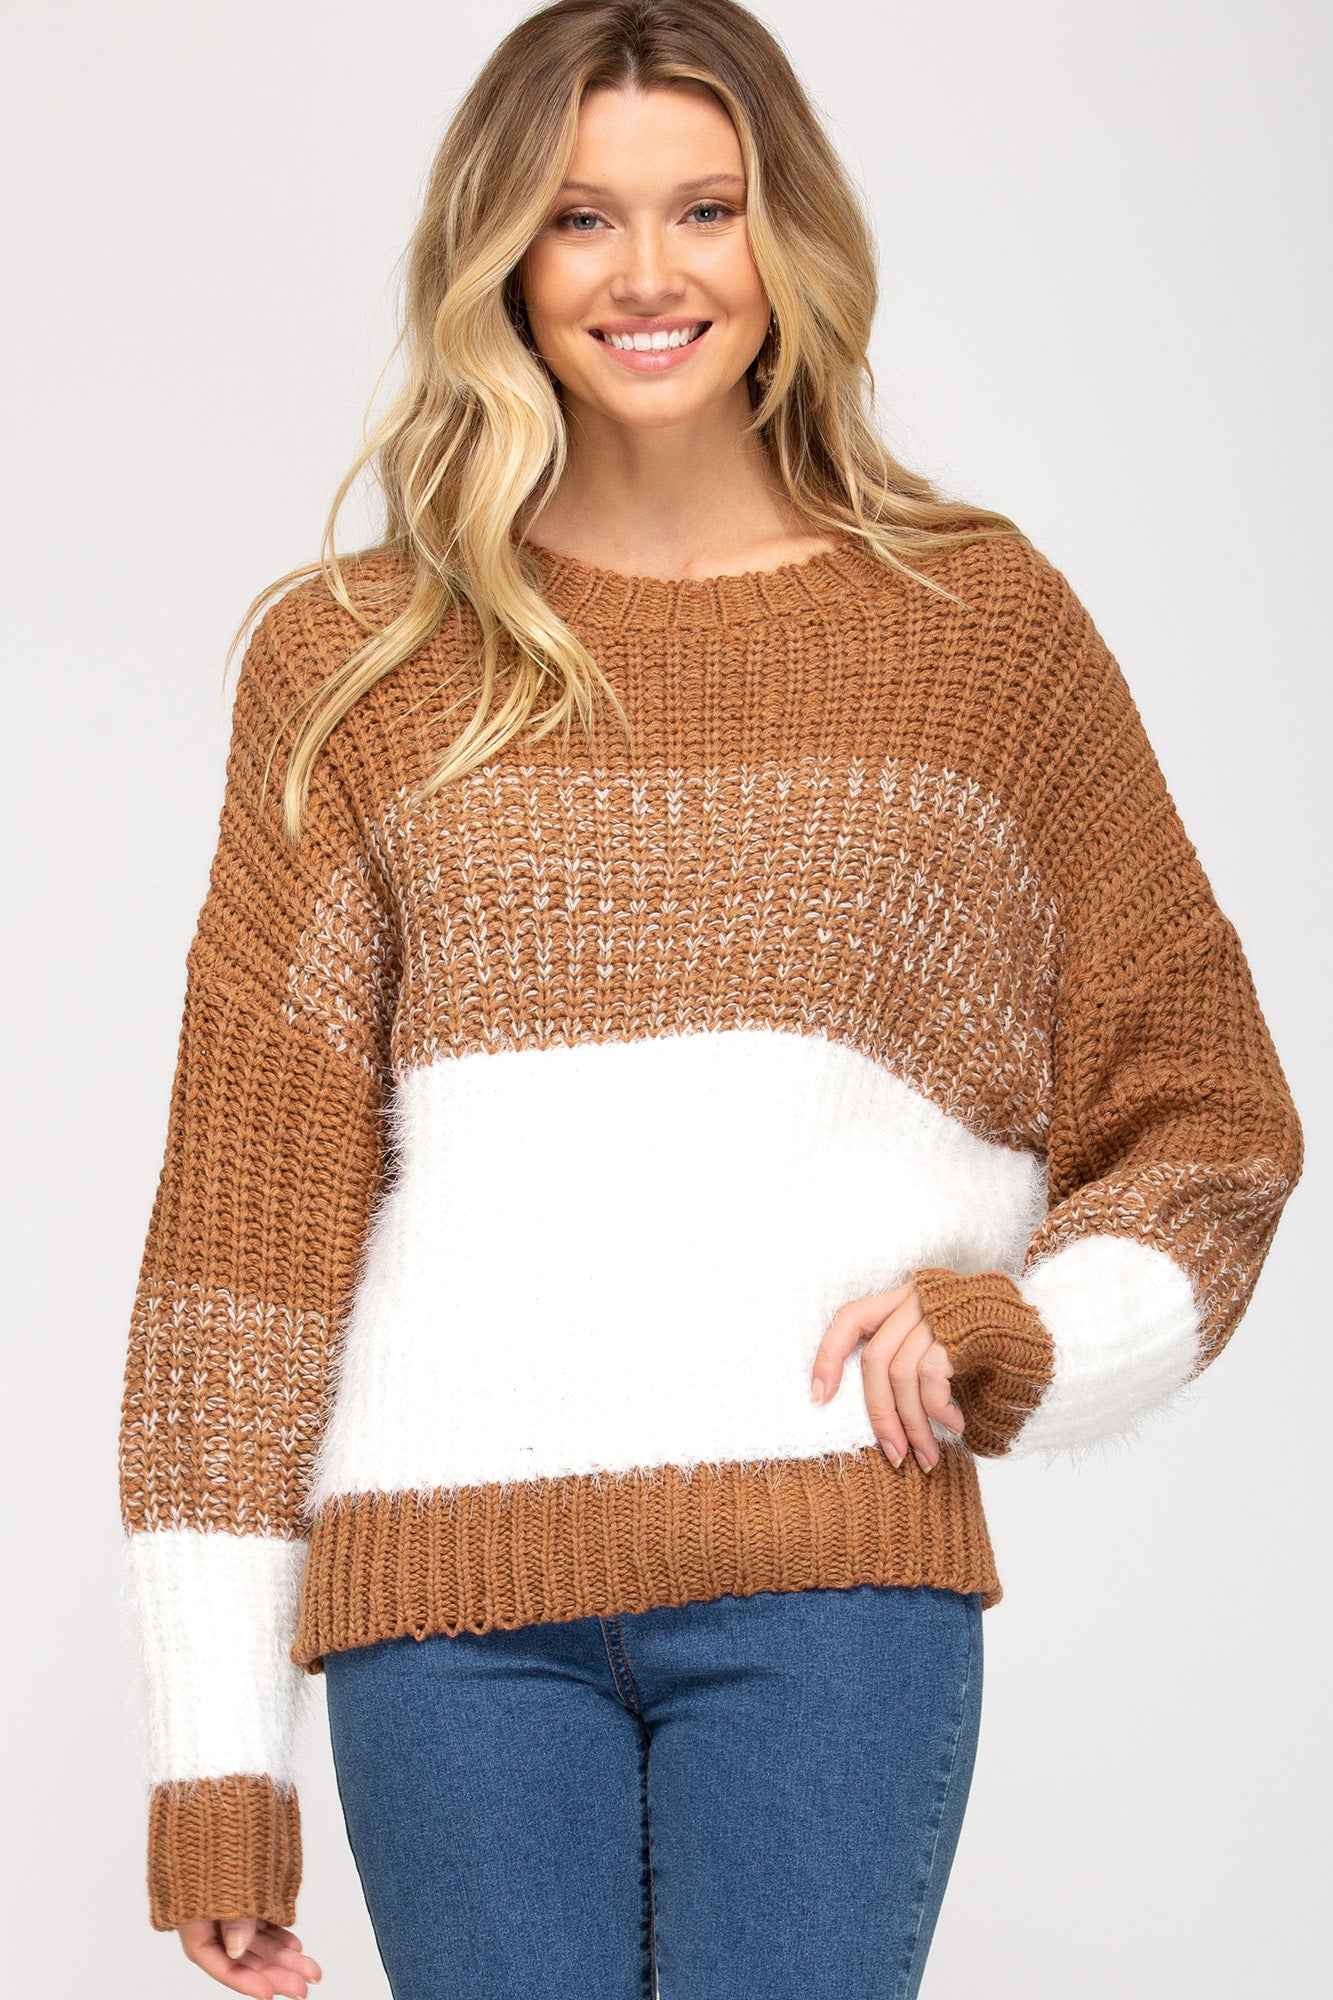 Long Sleeve Color Block Sweater!